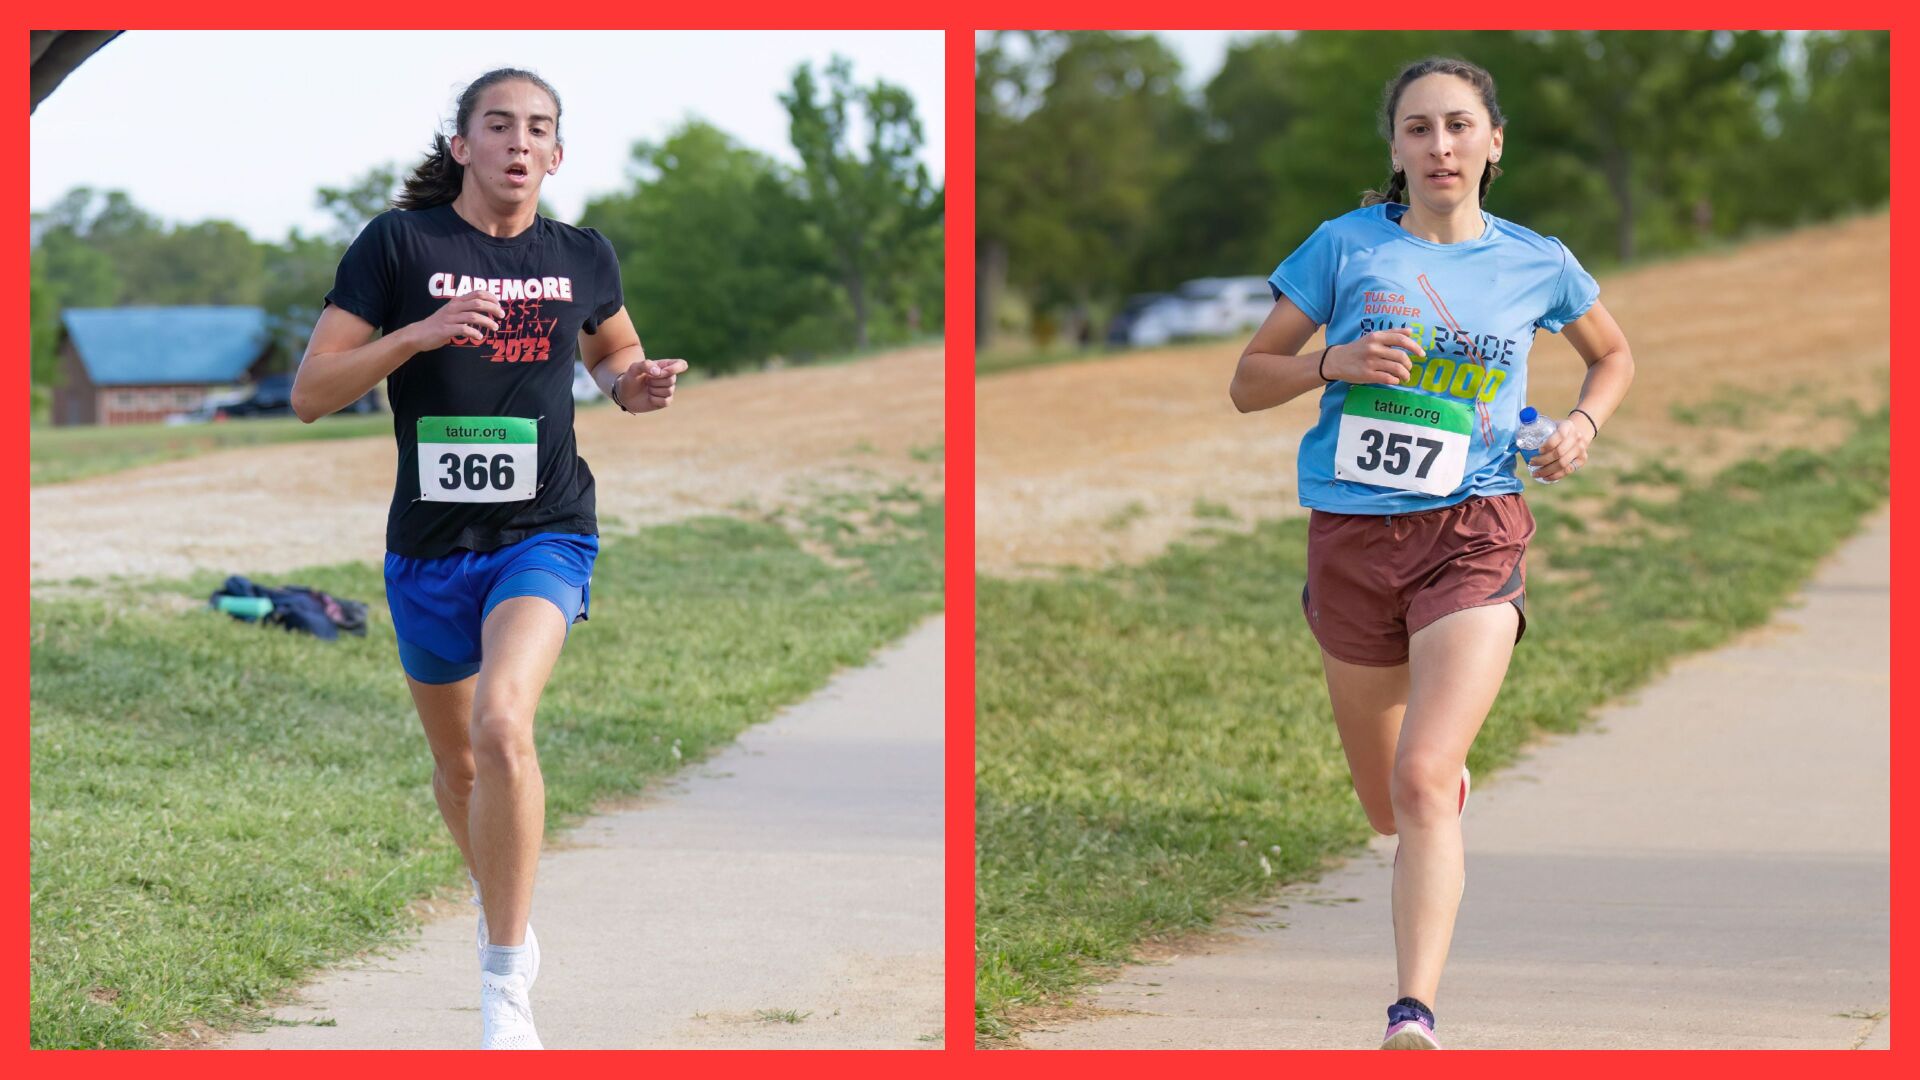 Ramos and Ross Shine in Claremore Hope Race 5K Showdown